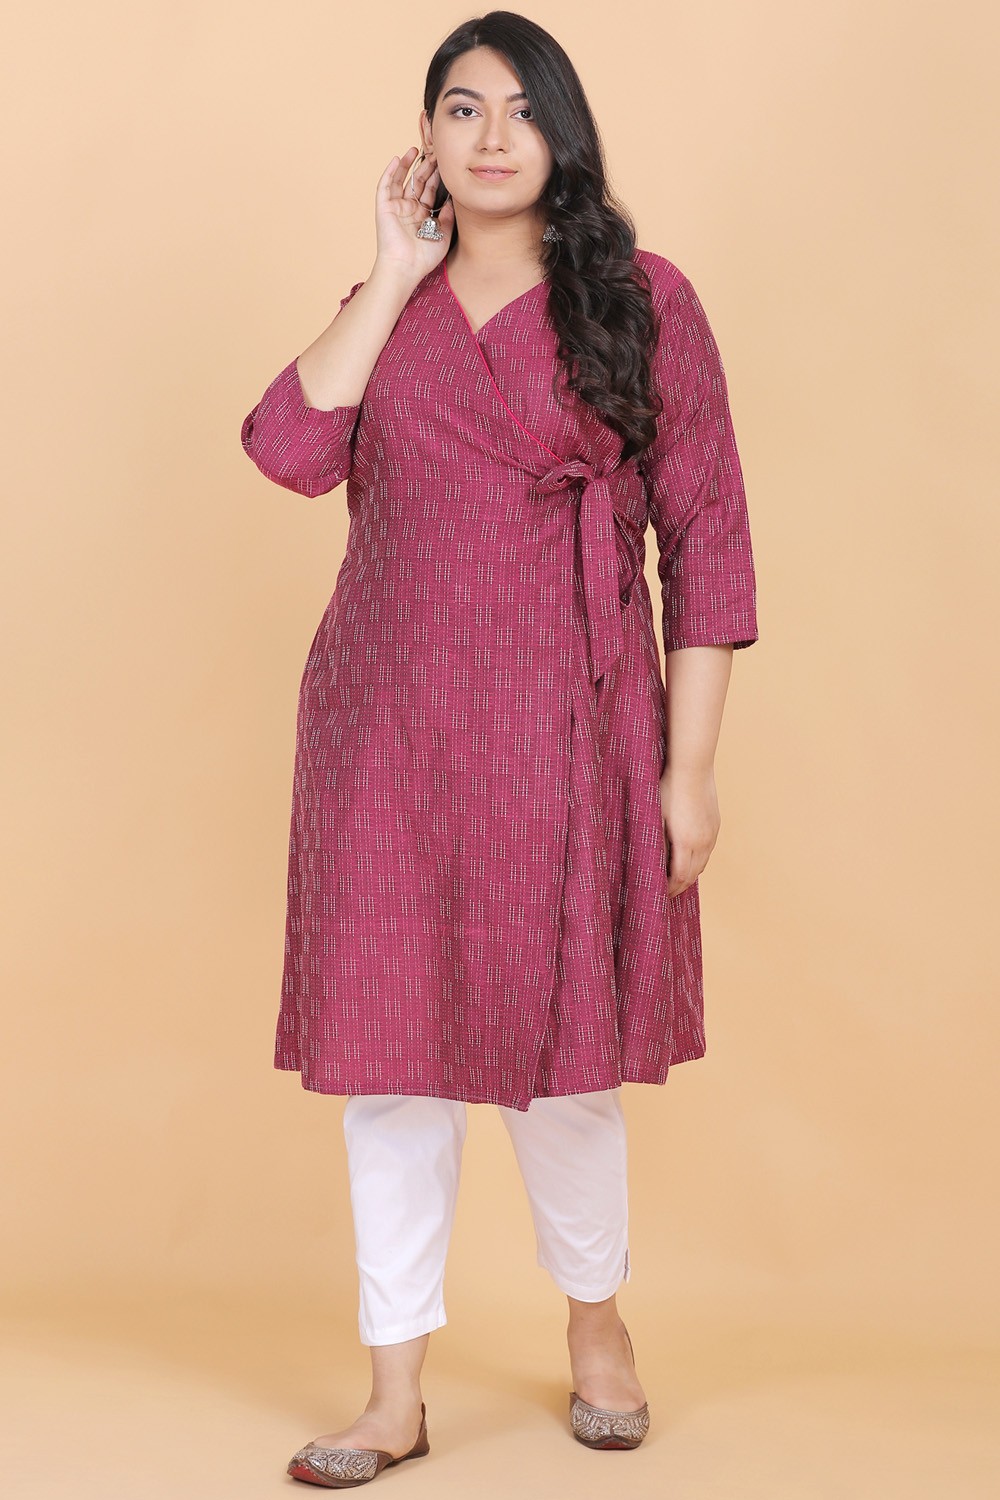 What are the latest kurti designs to wear this summer? - Quora